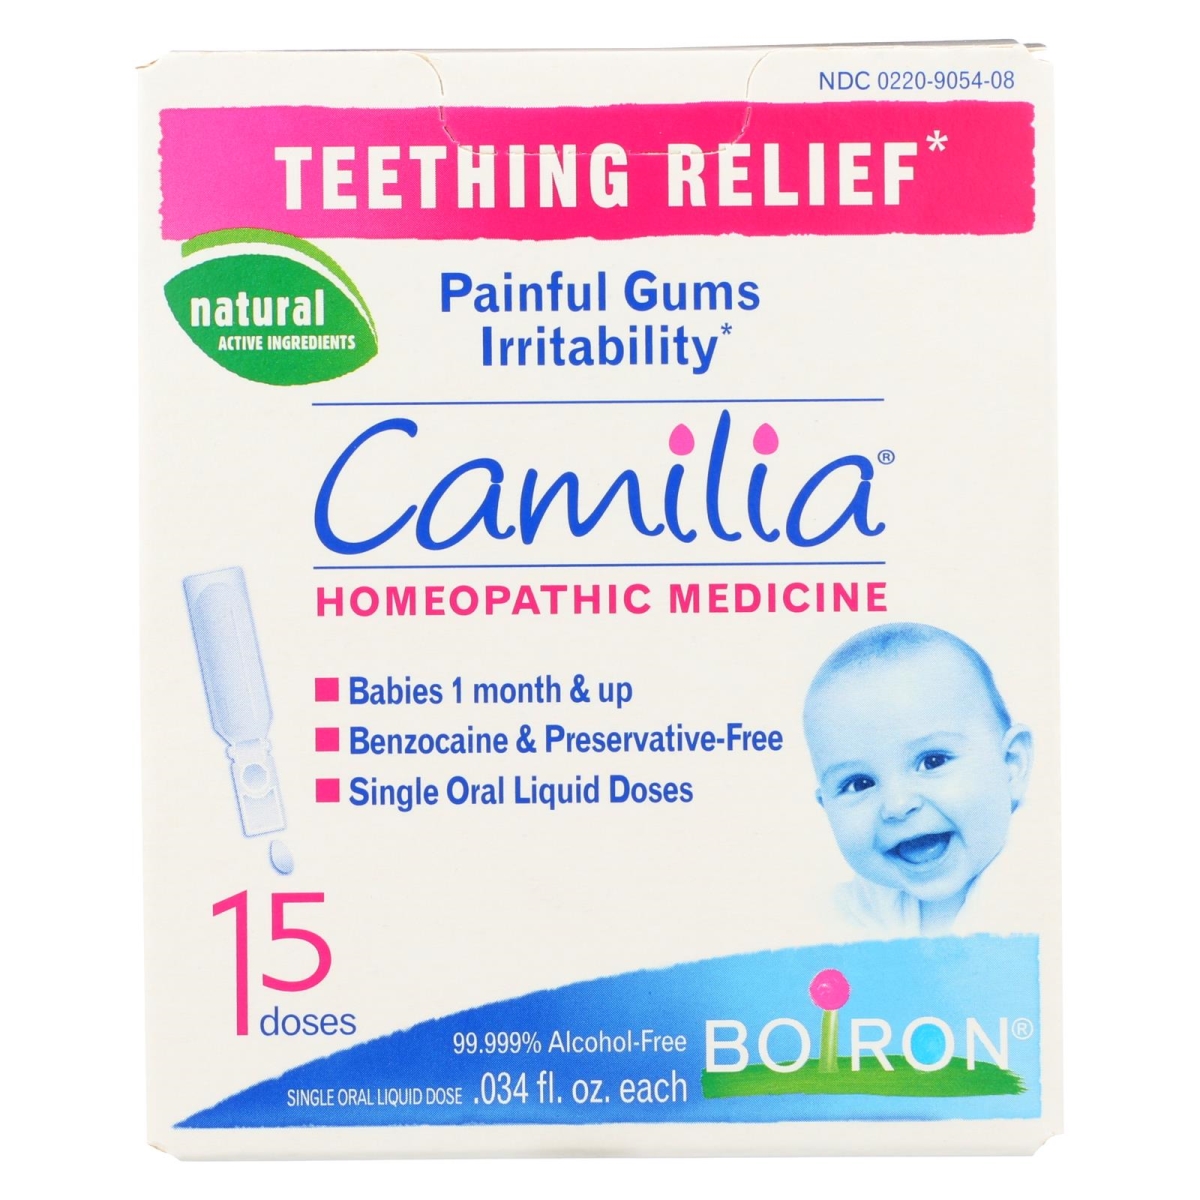 Picture of Boiron HG1017854 Teething Relief Camlia Homeopathic Medicine - 15 Dose